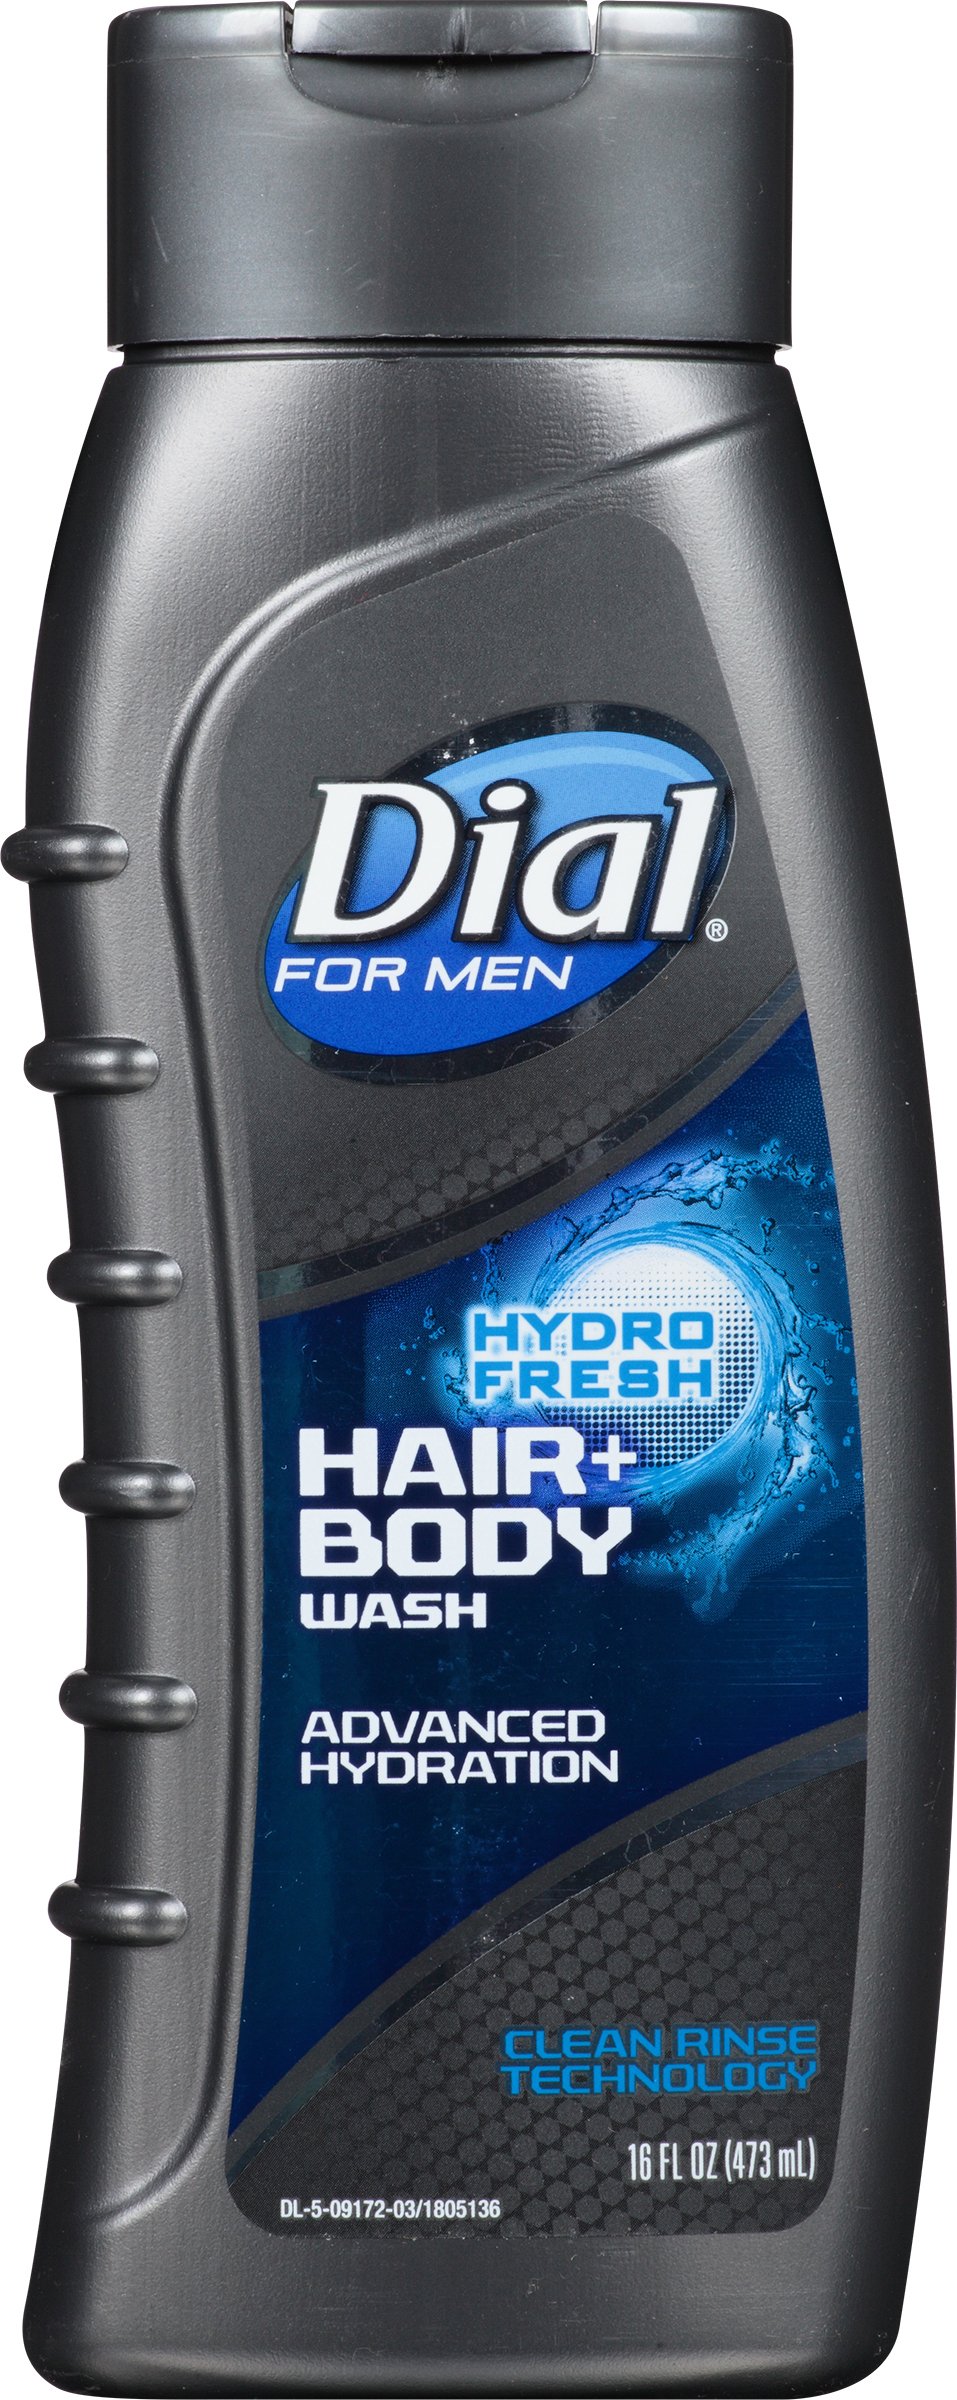 Dial For Men Hair and Body Wash, Hydro Fresh, 16 Fluid Ounce